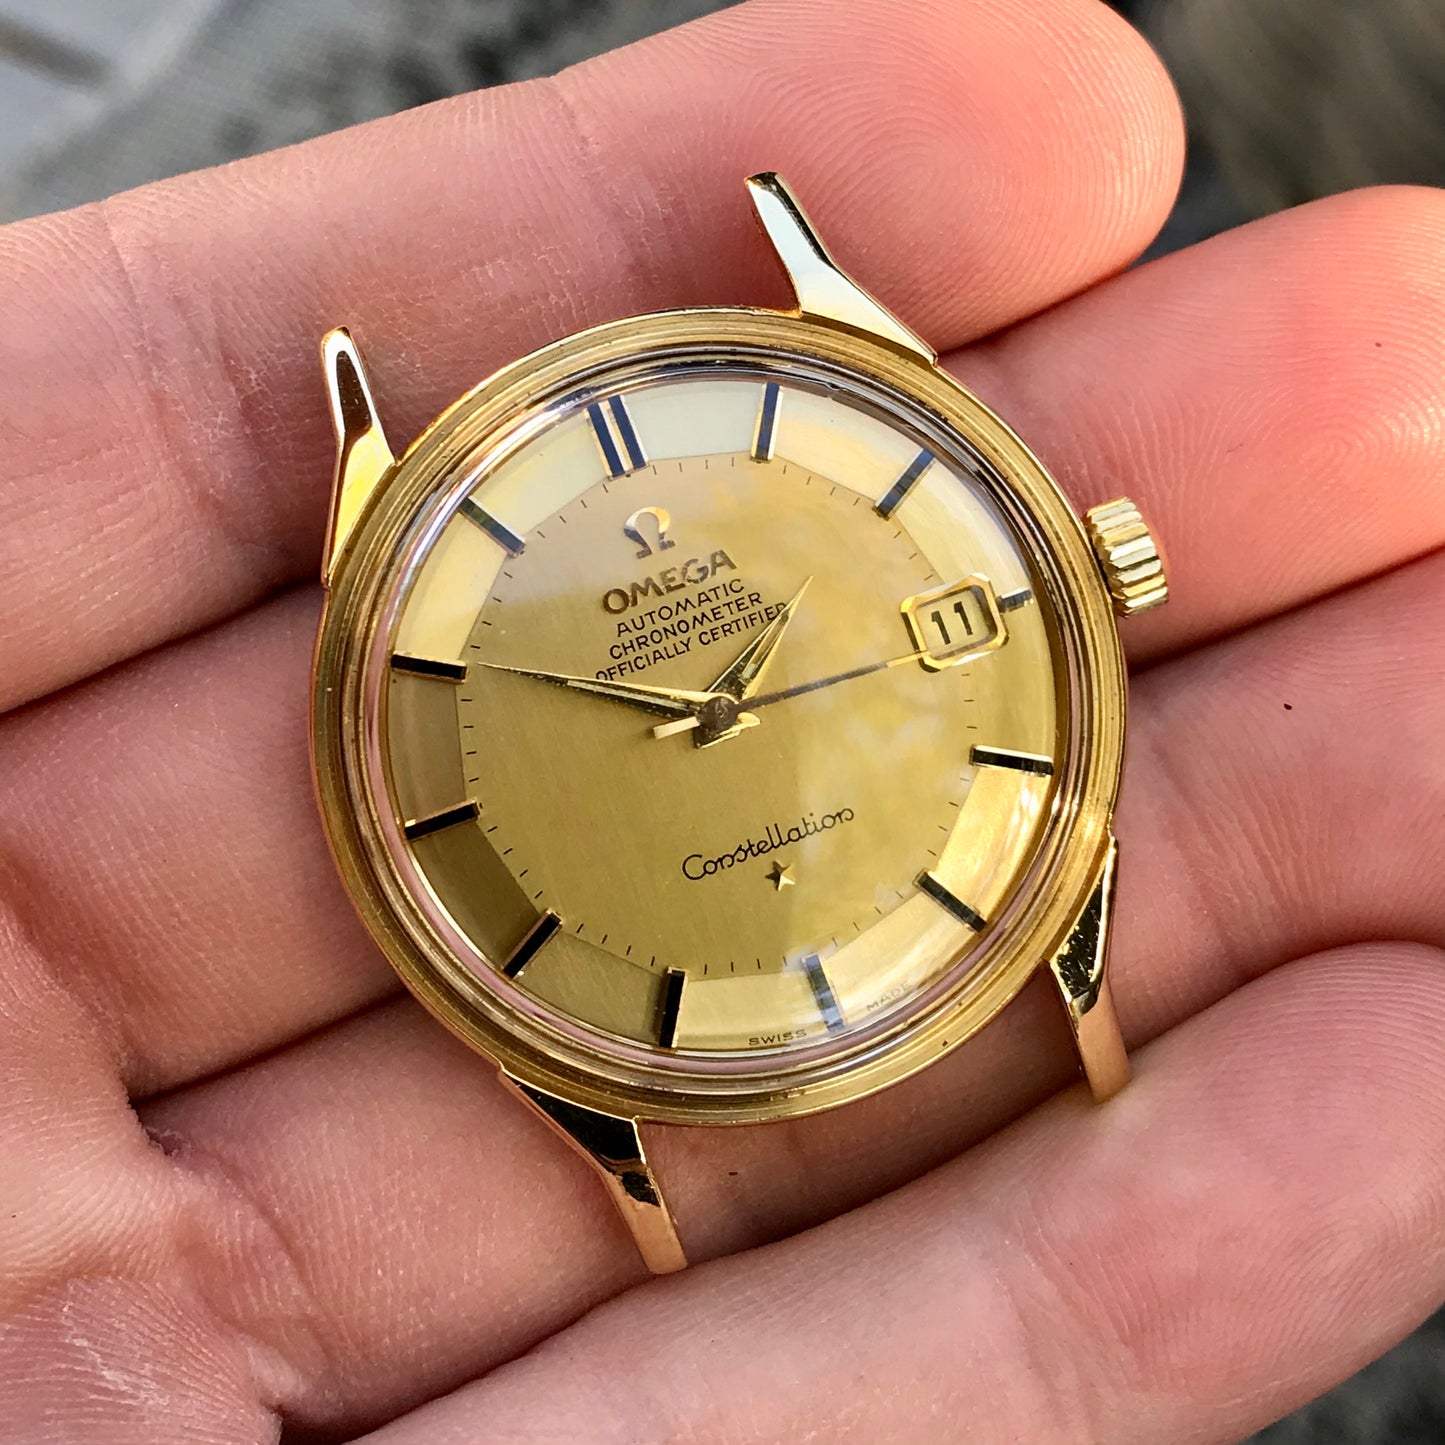 Vintage Omega Constellation Date 168.005 18K Yellow Gold Caliber 561 Automatic Wristwatch - Hashtag Watch Company